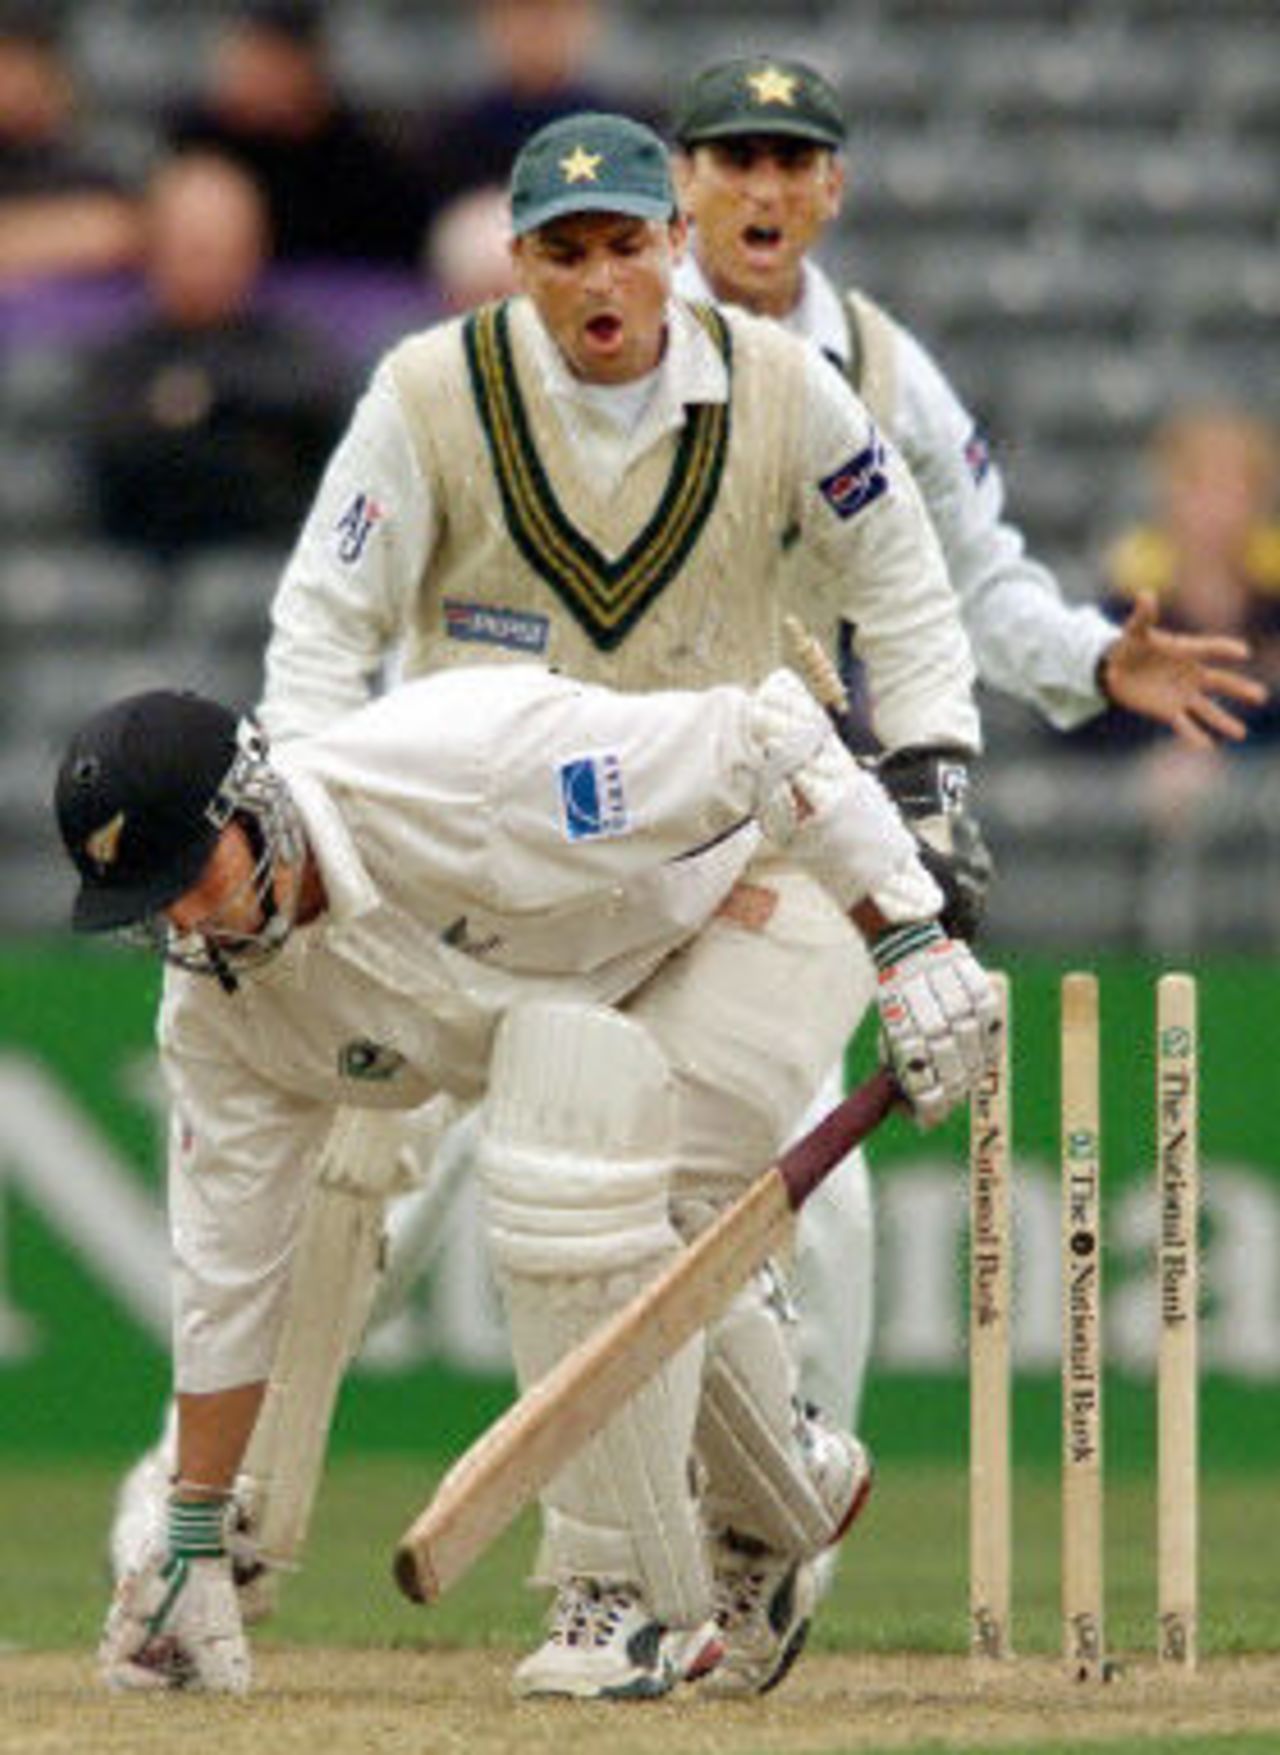 Mathew Sinclair keeps his toe in the crease as Moin Khan attempts a stumping as Younis Khan looks on, day 1, 2nd Test at Christchurch, 15-19 March 2001.